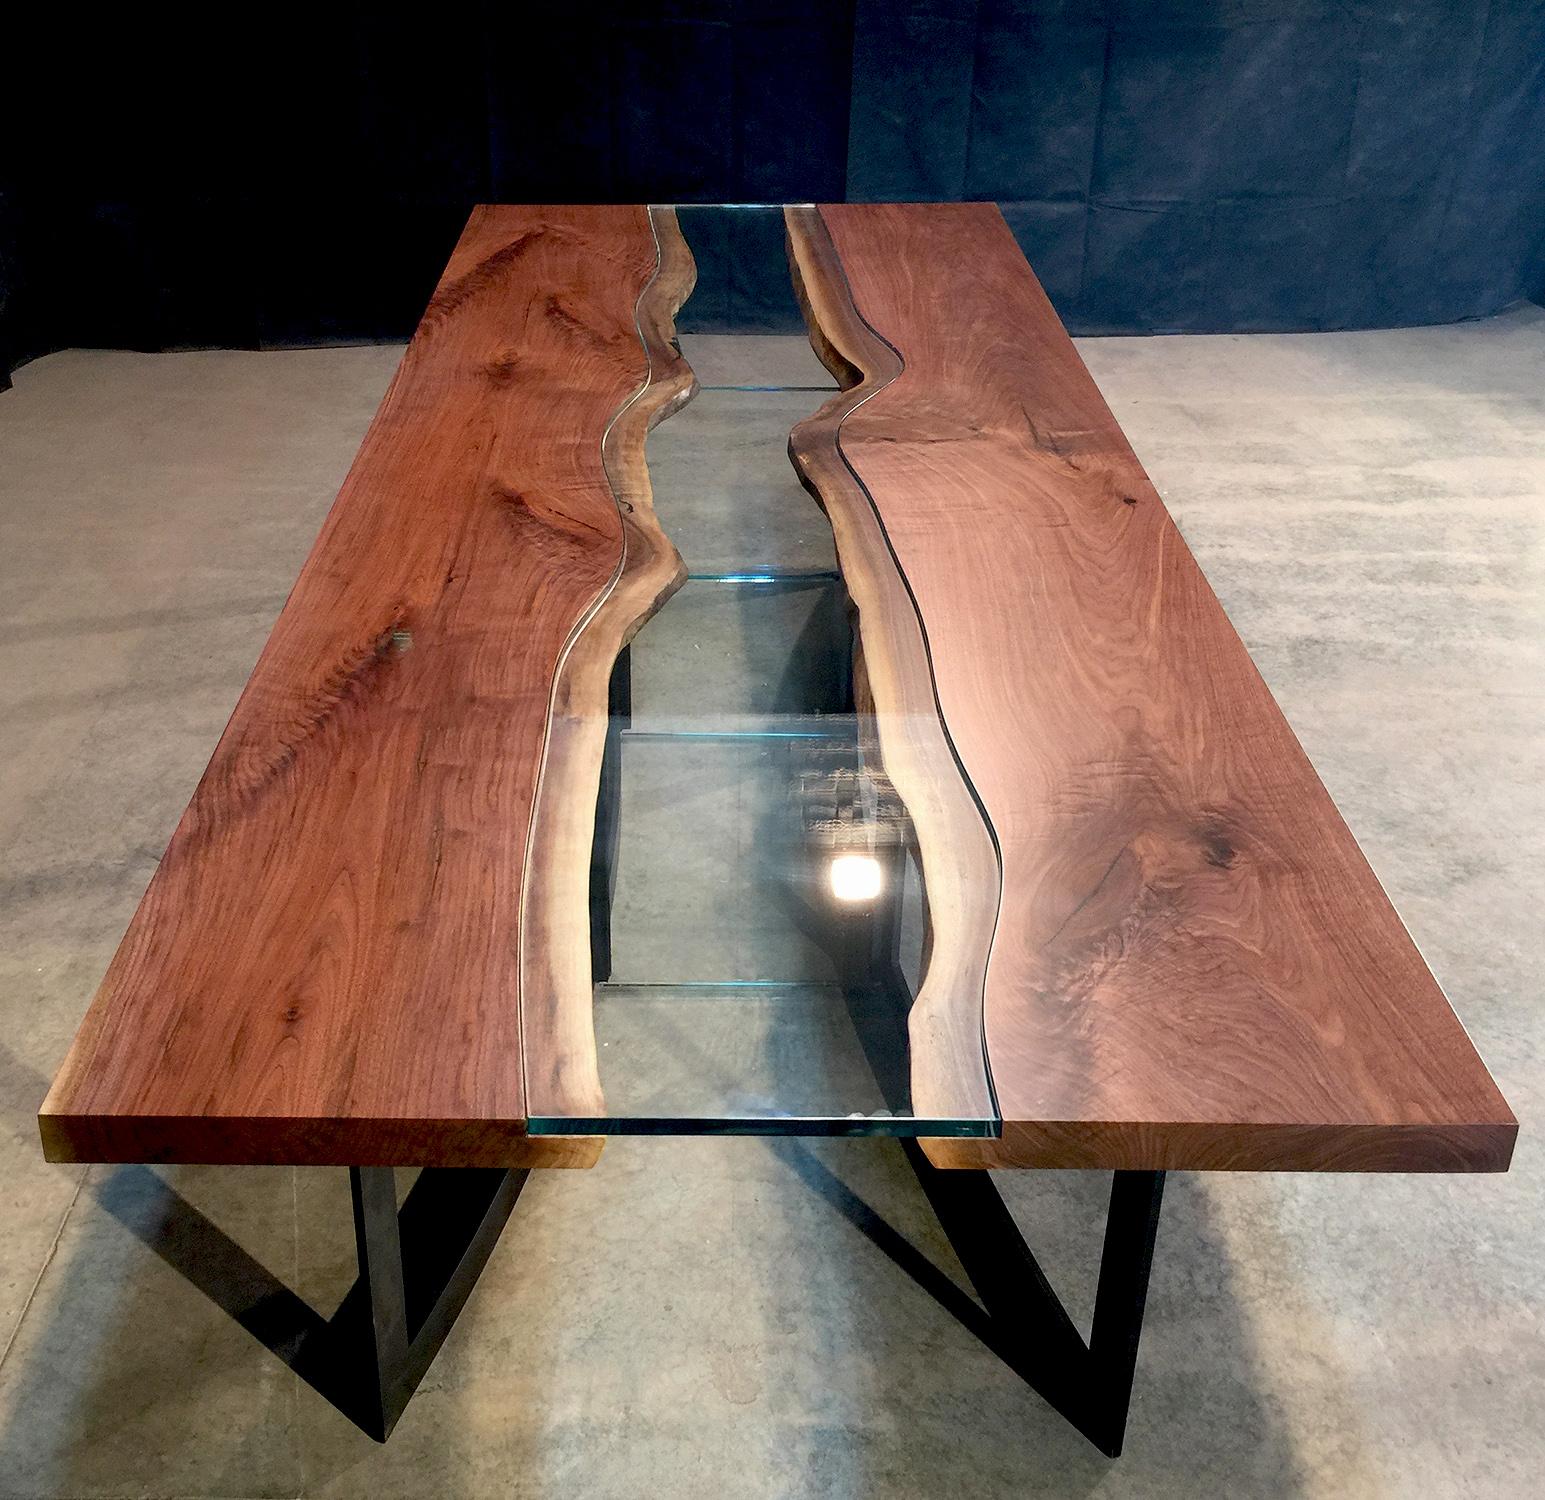 Modern Black Walnut Live Edge River Dining Table with Blackened Metal Legs In New Condition For Sale In Hobart, NY